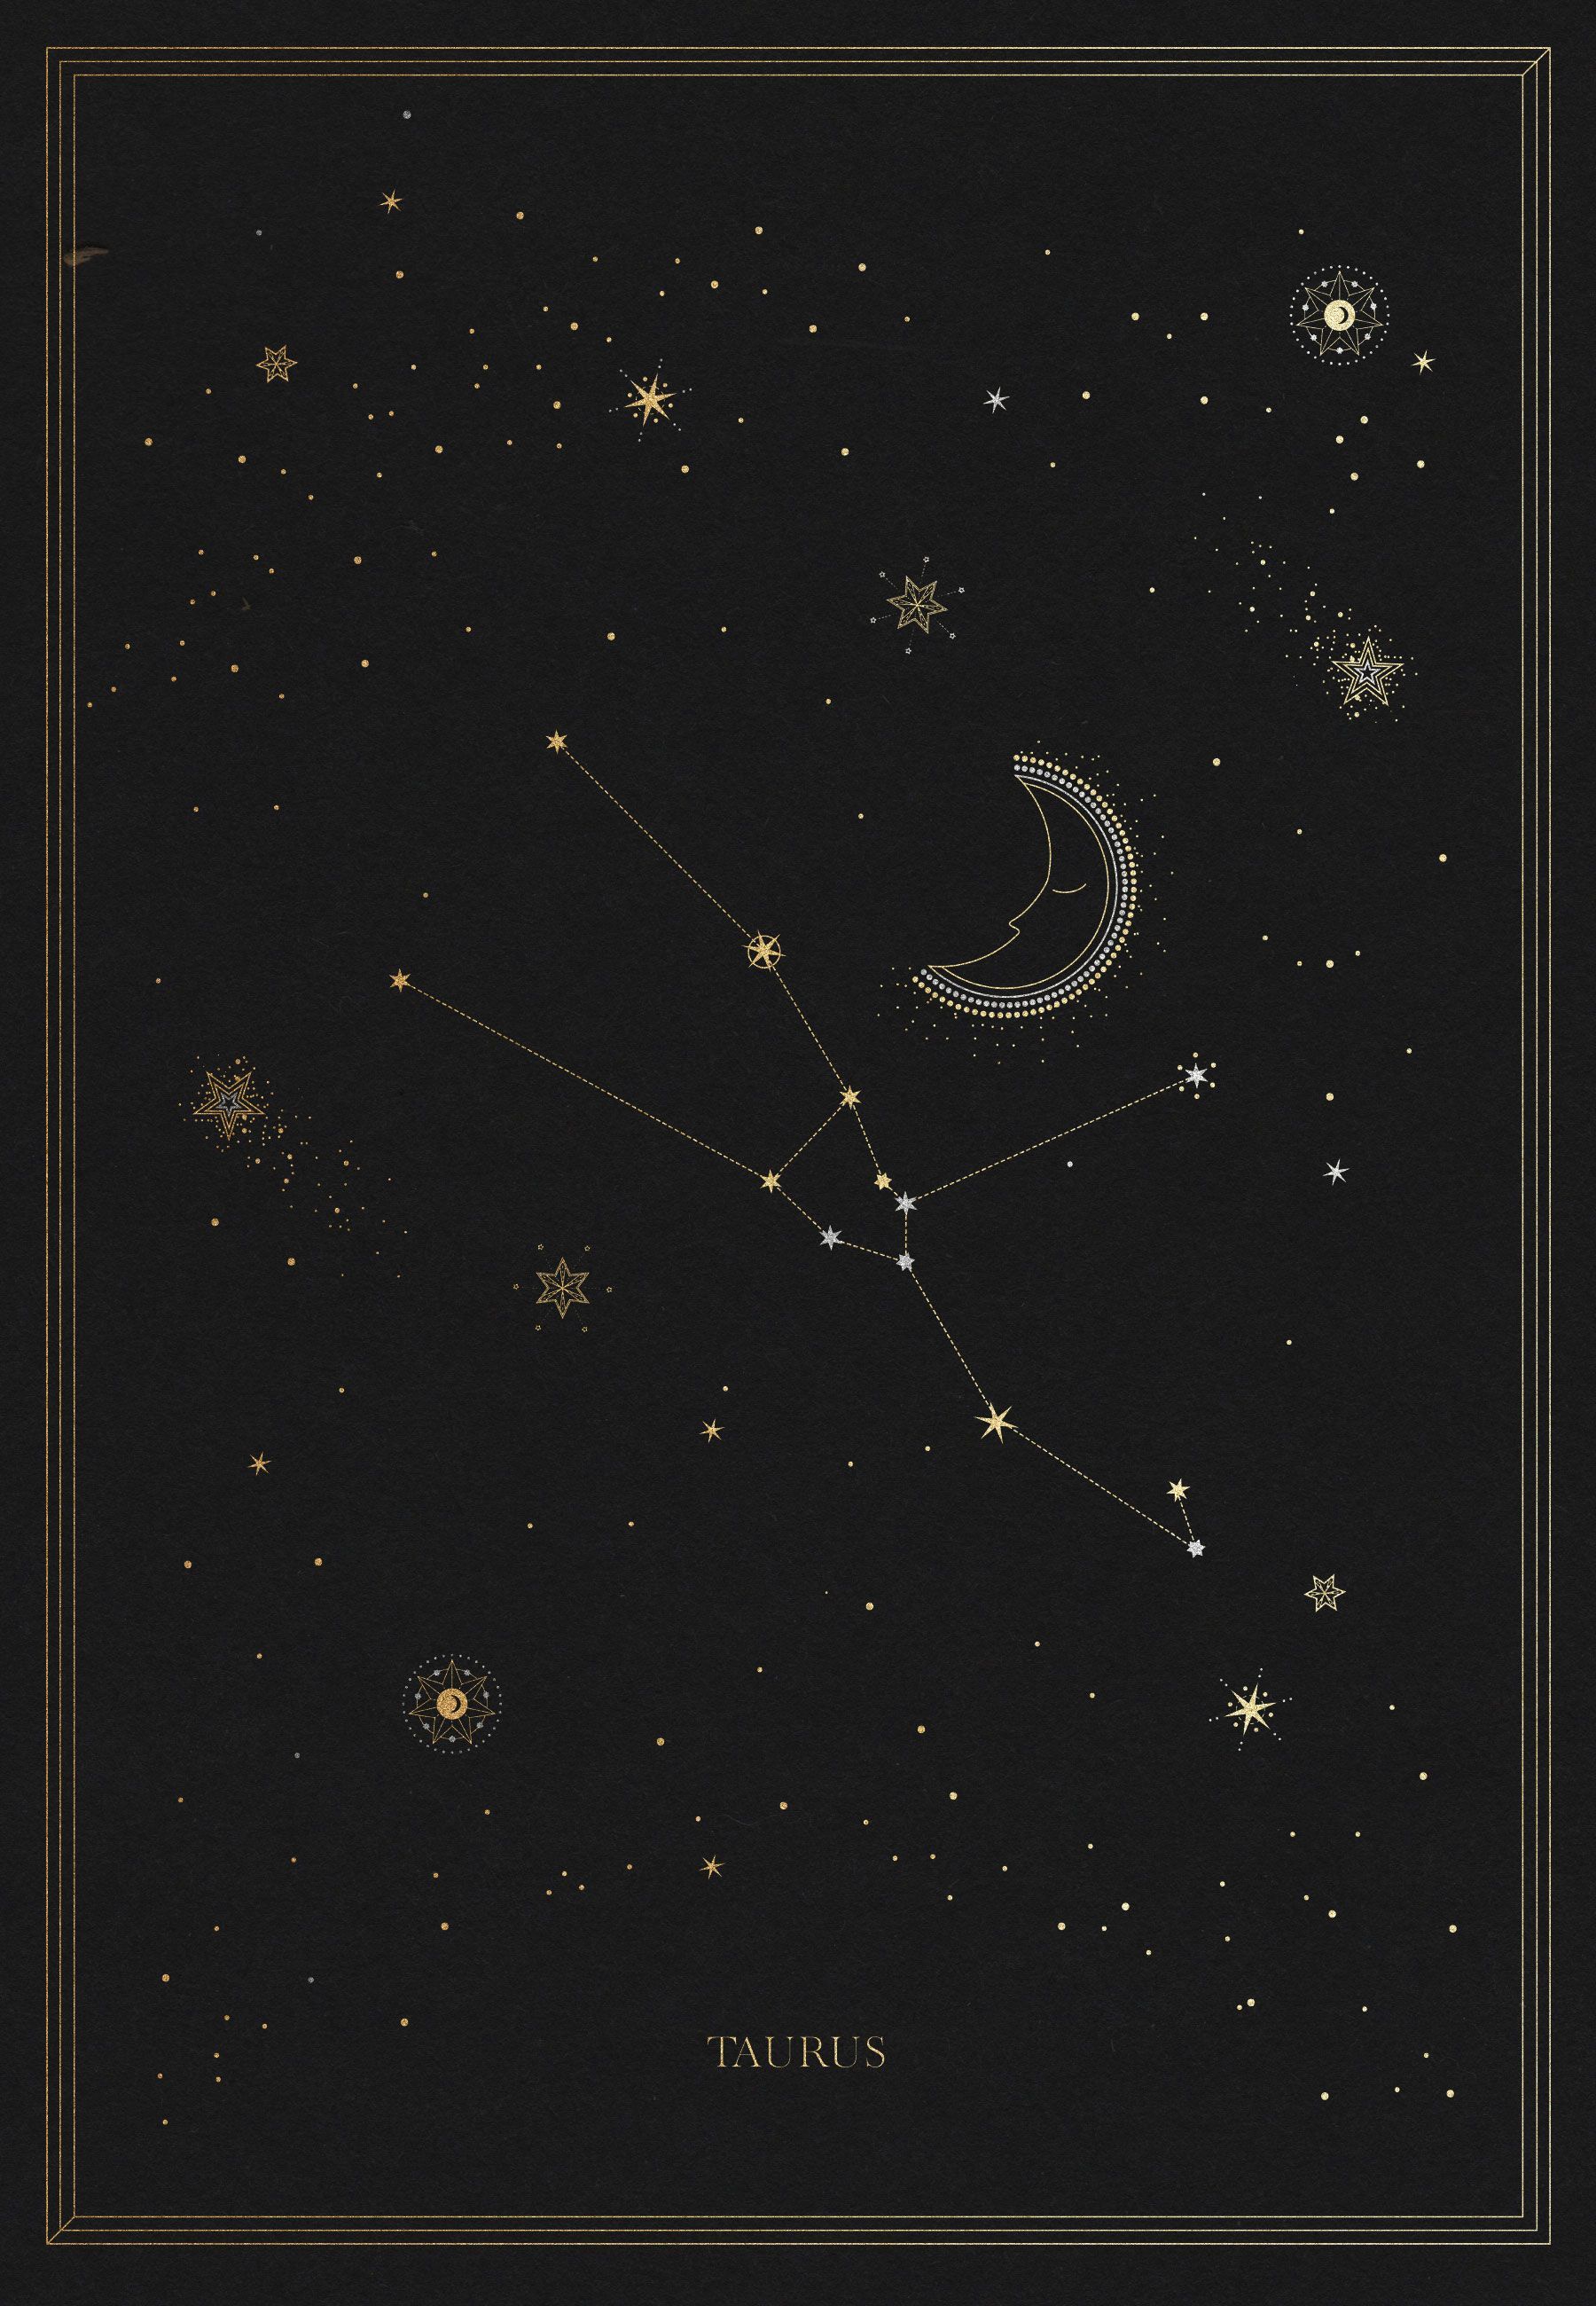 A new Era begins. Back with you shortly. Taurus constellation tattoo, Taurus constellation, Taurus wallpaper